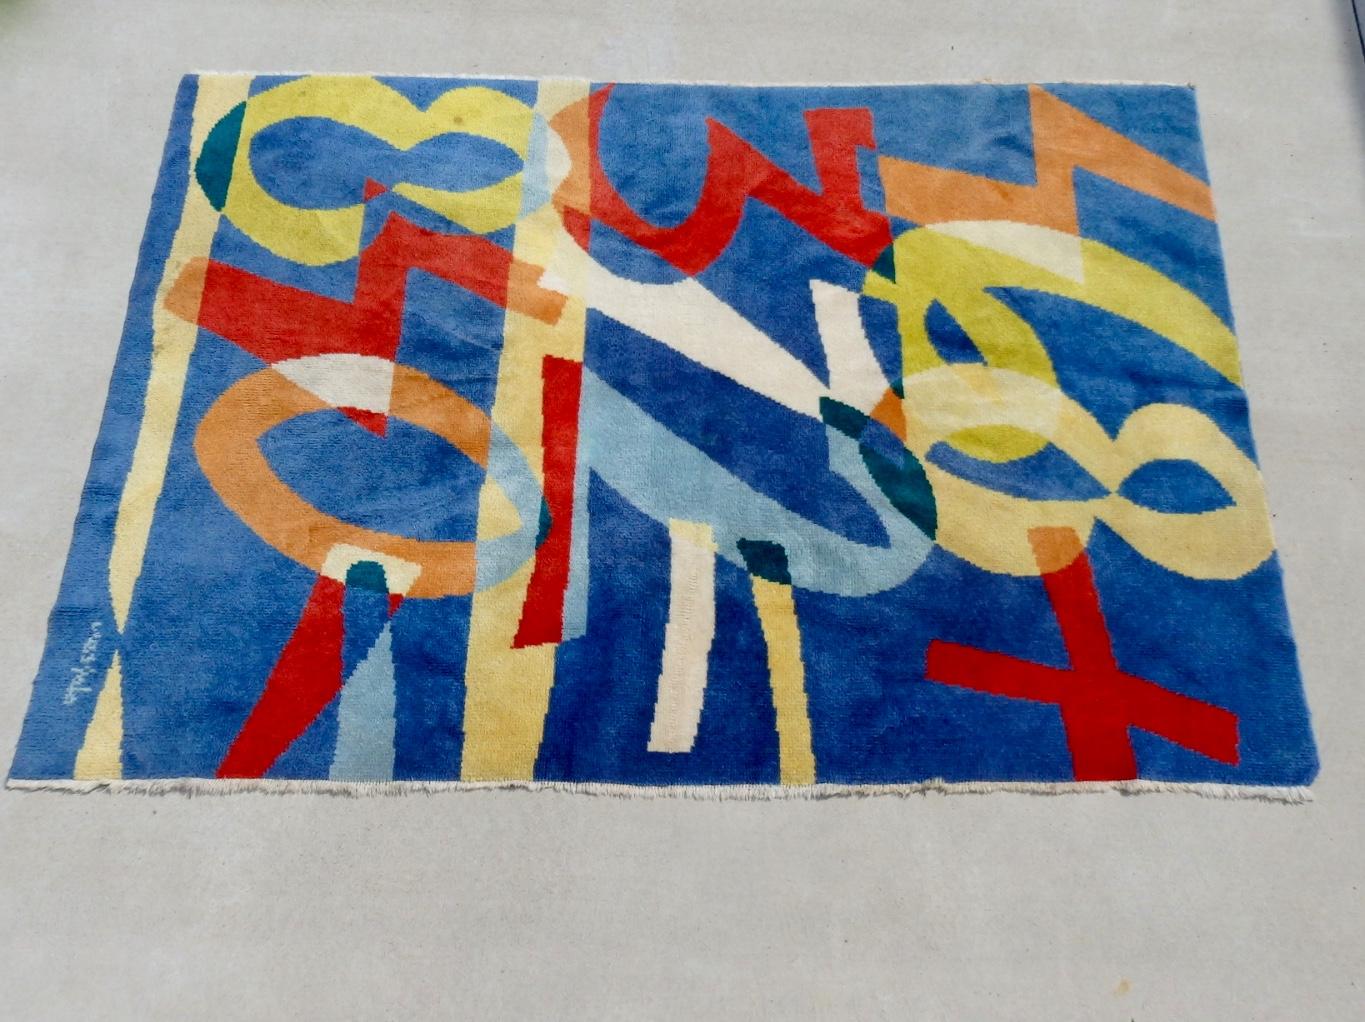 Modernist area rug with vivid numerical theme colors. Rug is signed and shown but signature is illegible to me.